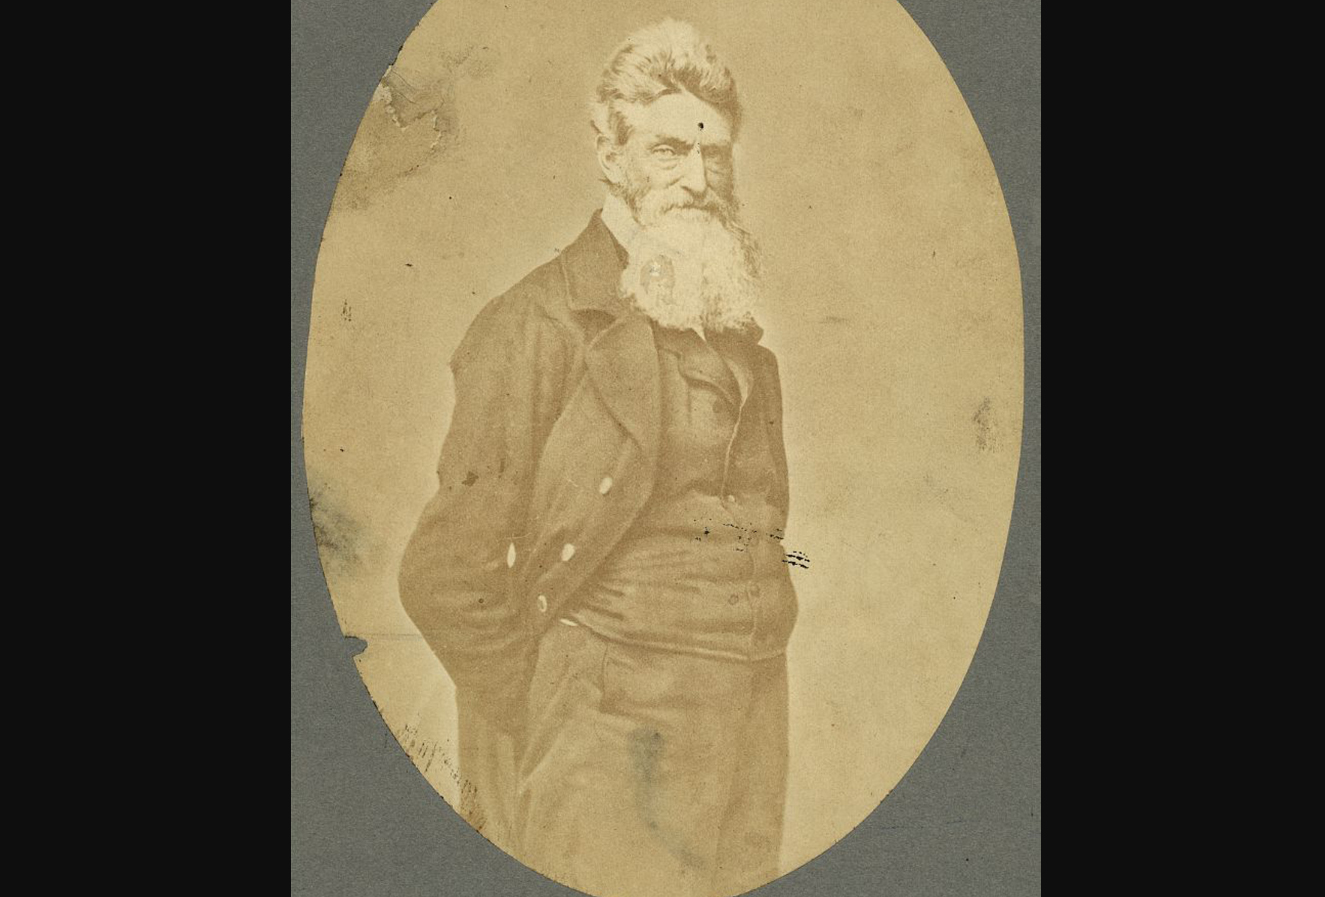 The Abolitionist Movement and John Brown